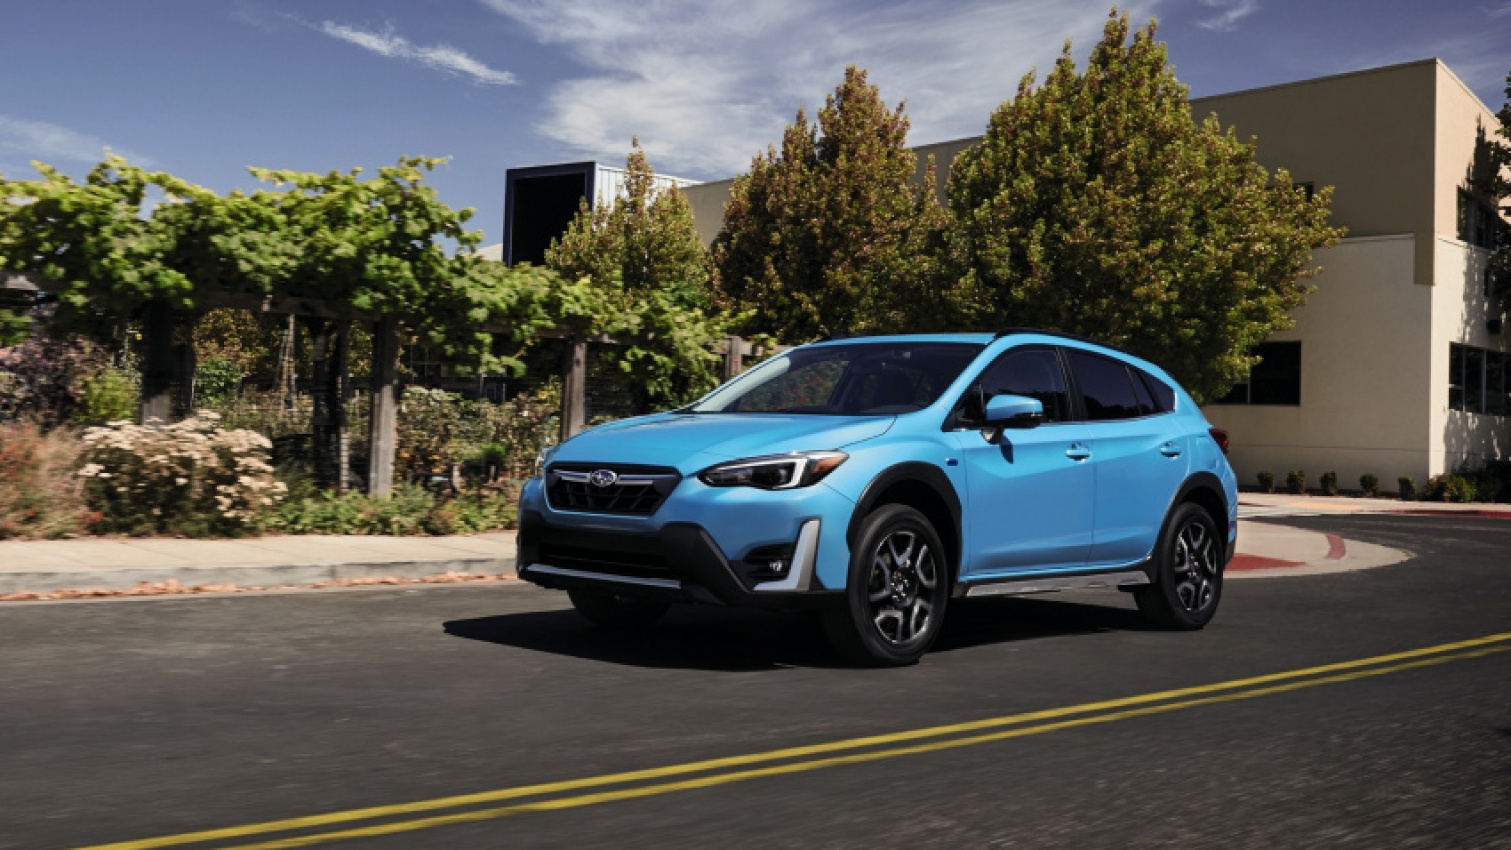 cars, ford, hybrid cars, subaru, android, hybrids, subaru news, android, 2022 subaru crosstrek hybrid still goes 17 miles electric, is unique among affordable plug-in hybrids